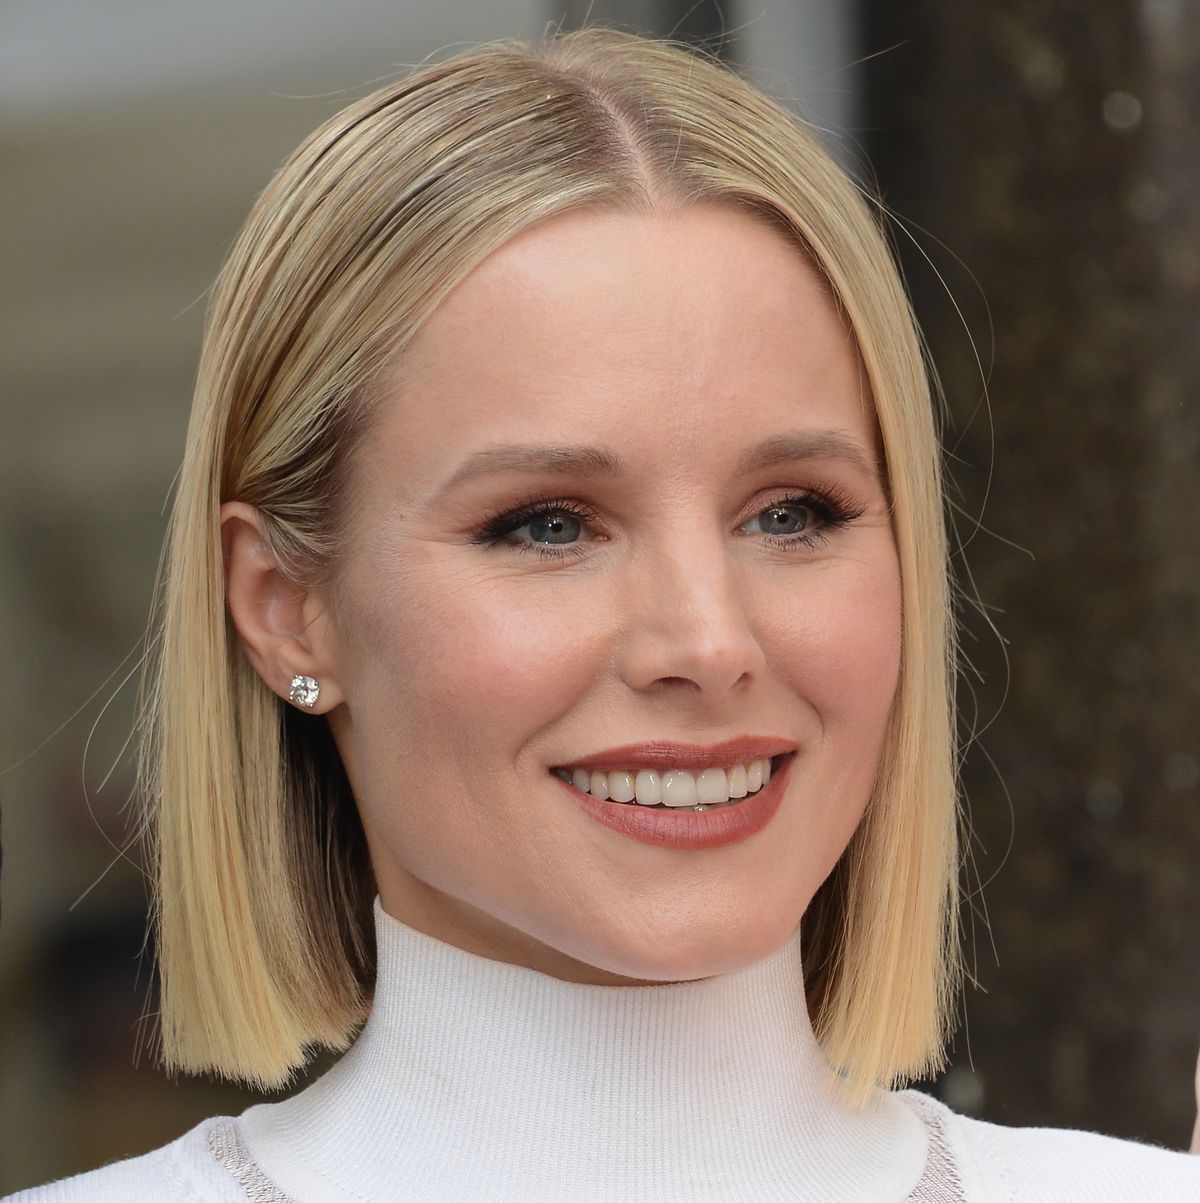 Kristen Bell And Idina Menzel Are Honored With Stars On The Hollywood Walk Of Fame